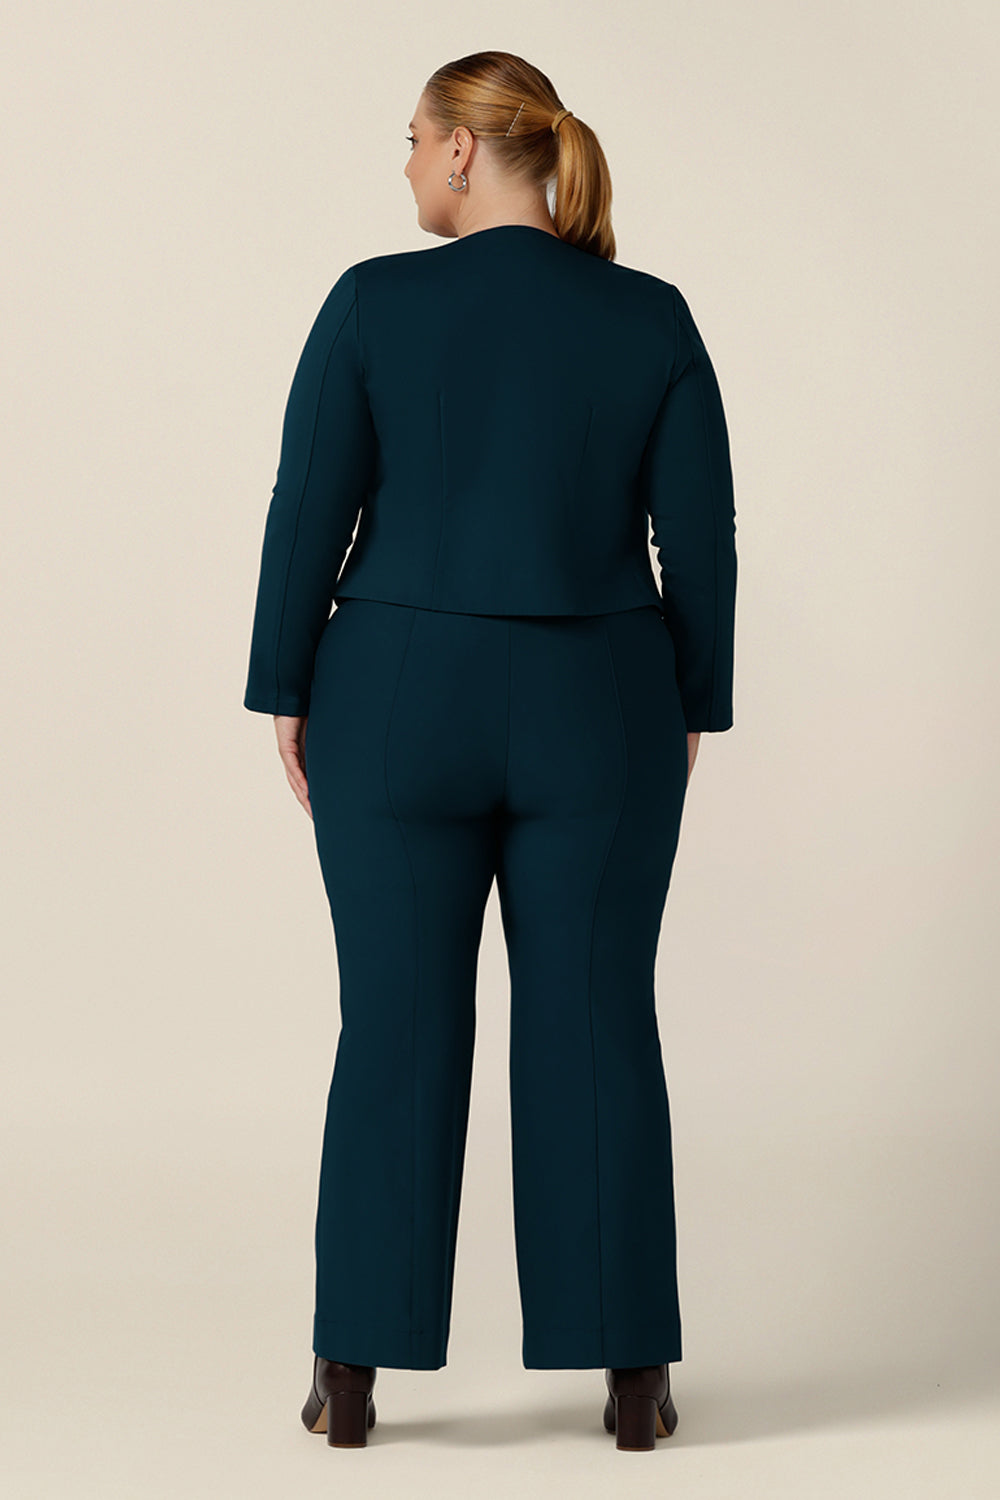 Back view of a plus size, size 18 woman wearing petrol blue, tailored bootcut pants with a long sleeve printed top and tailored work jacket. Made in Australia in ponte fabric, these comfortable work pants are great for curvy women - shop in sizes 8 to 24.